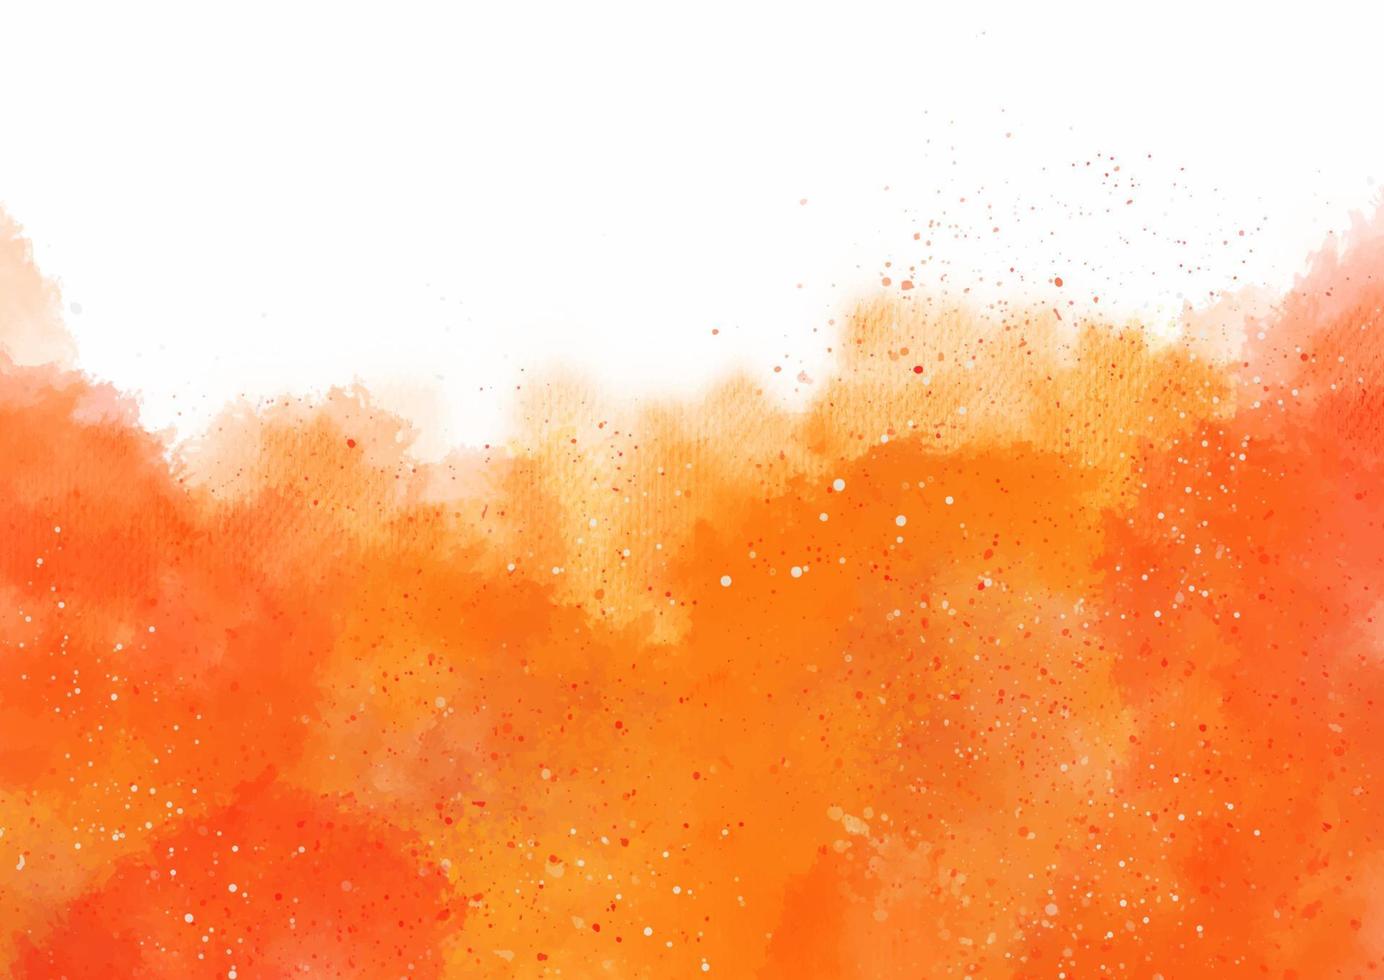 abstract orange watercolour background with splatters vector